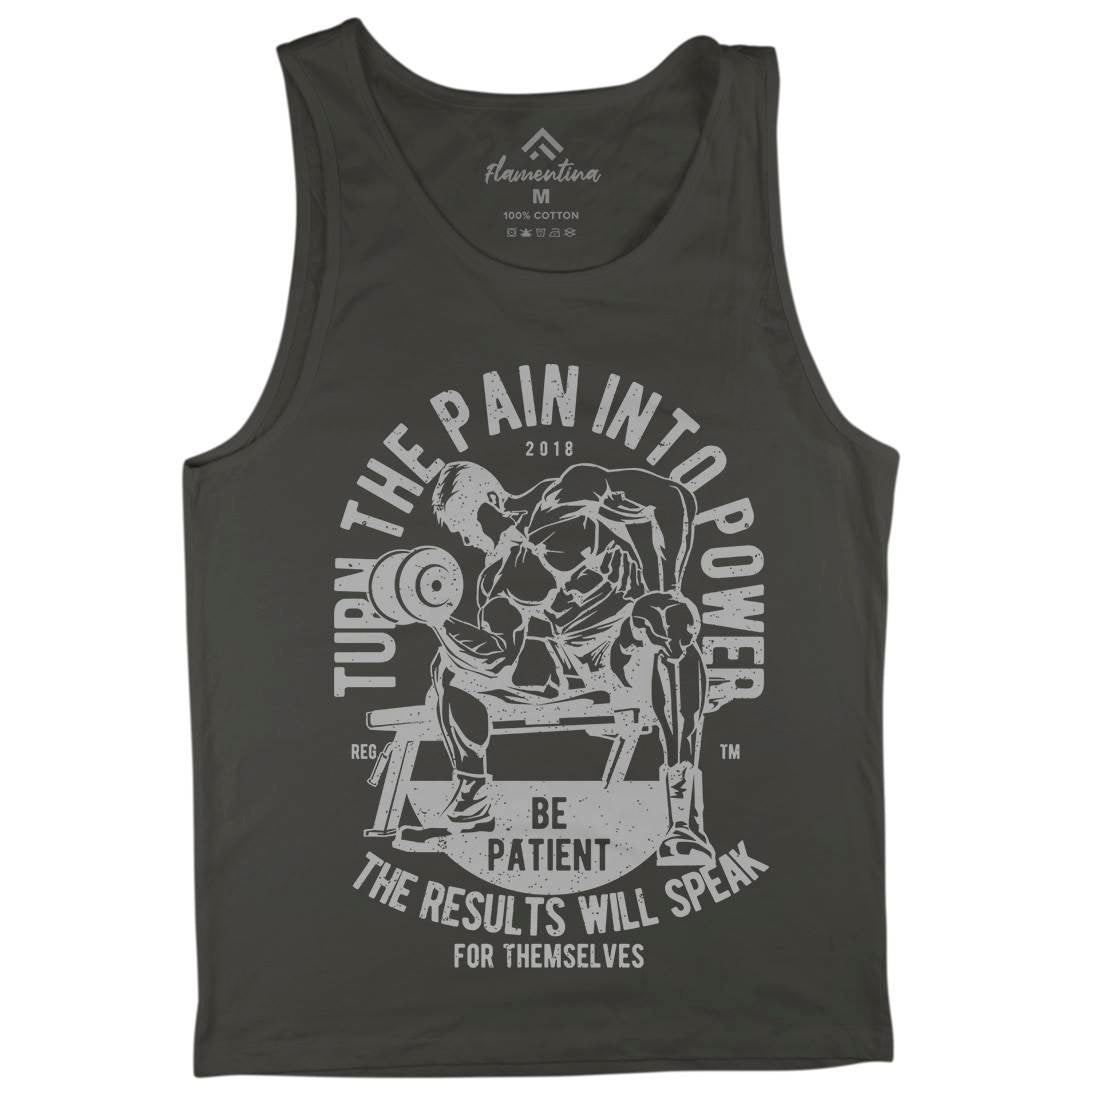 Turn The Pain Into Power Mens Tank Top Vest Gym A780